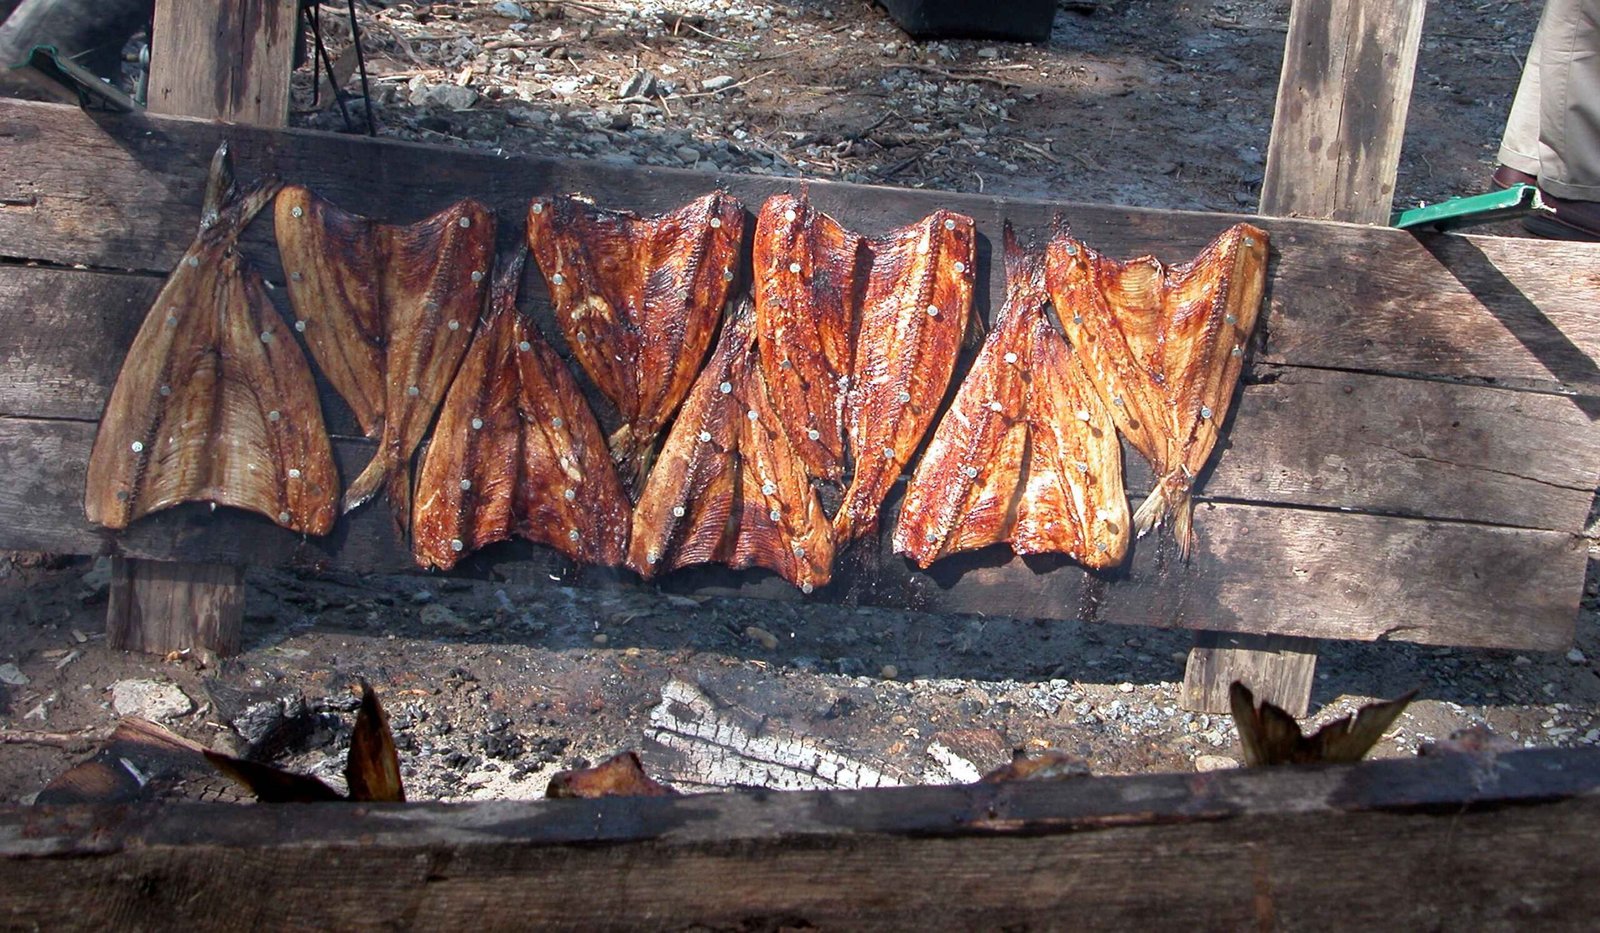 How to Make Your Own Smoked Foods